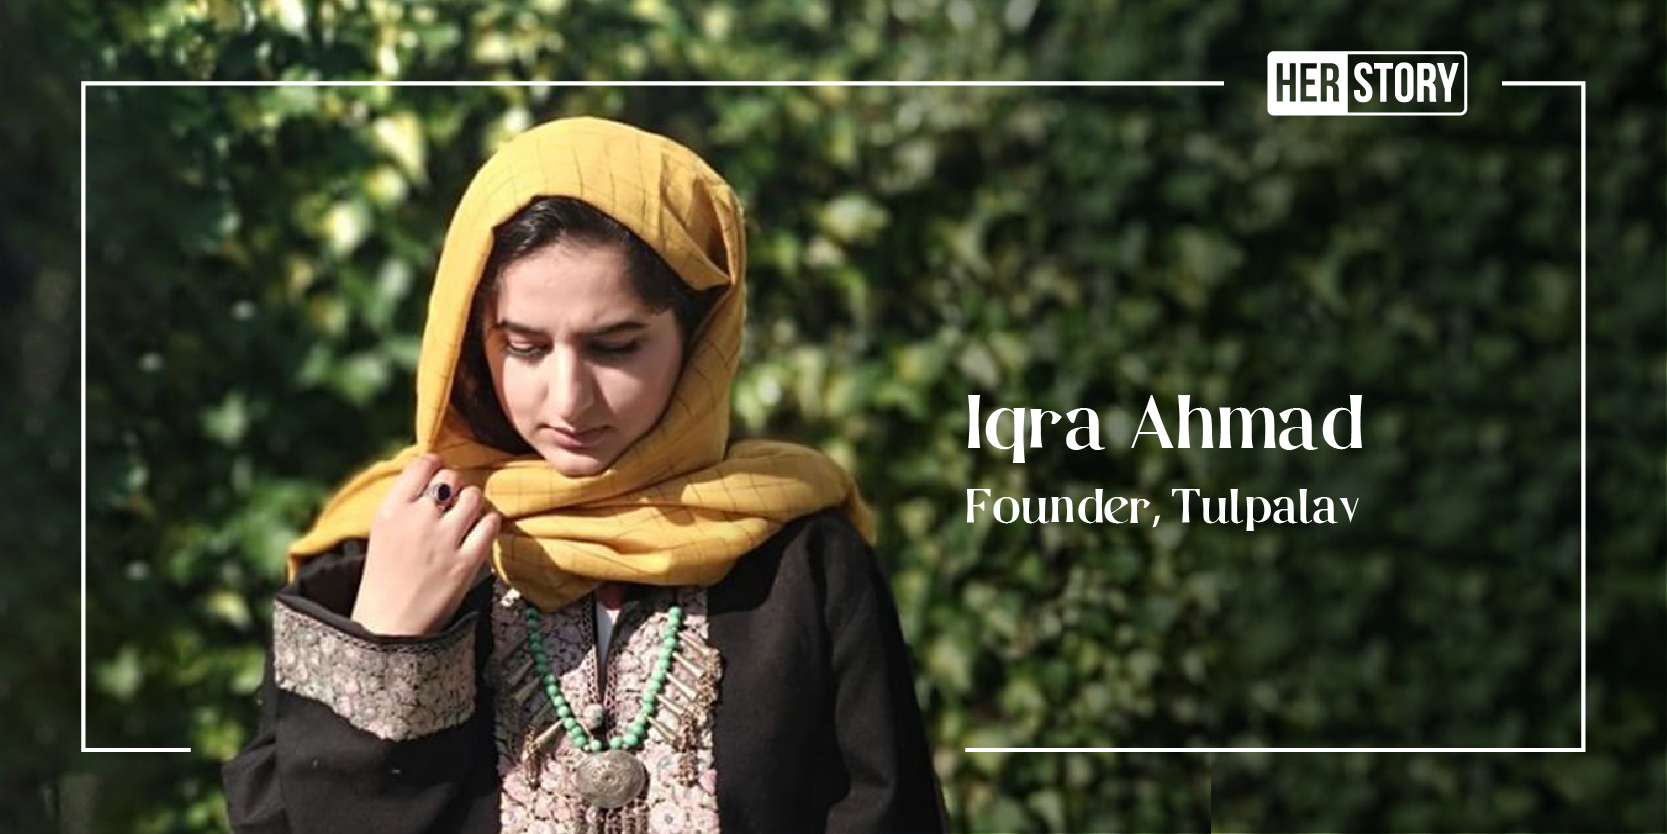 Meet the woman entrepreneur who started Kashmir’s first online fashion store 